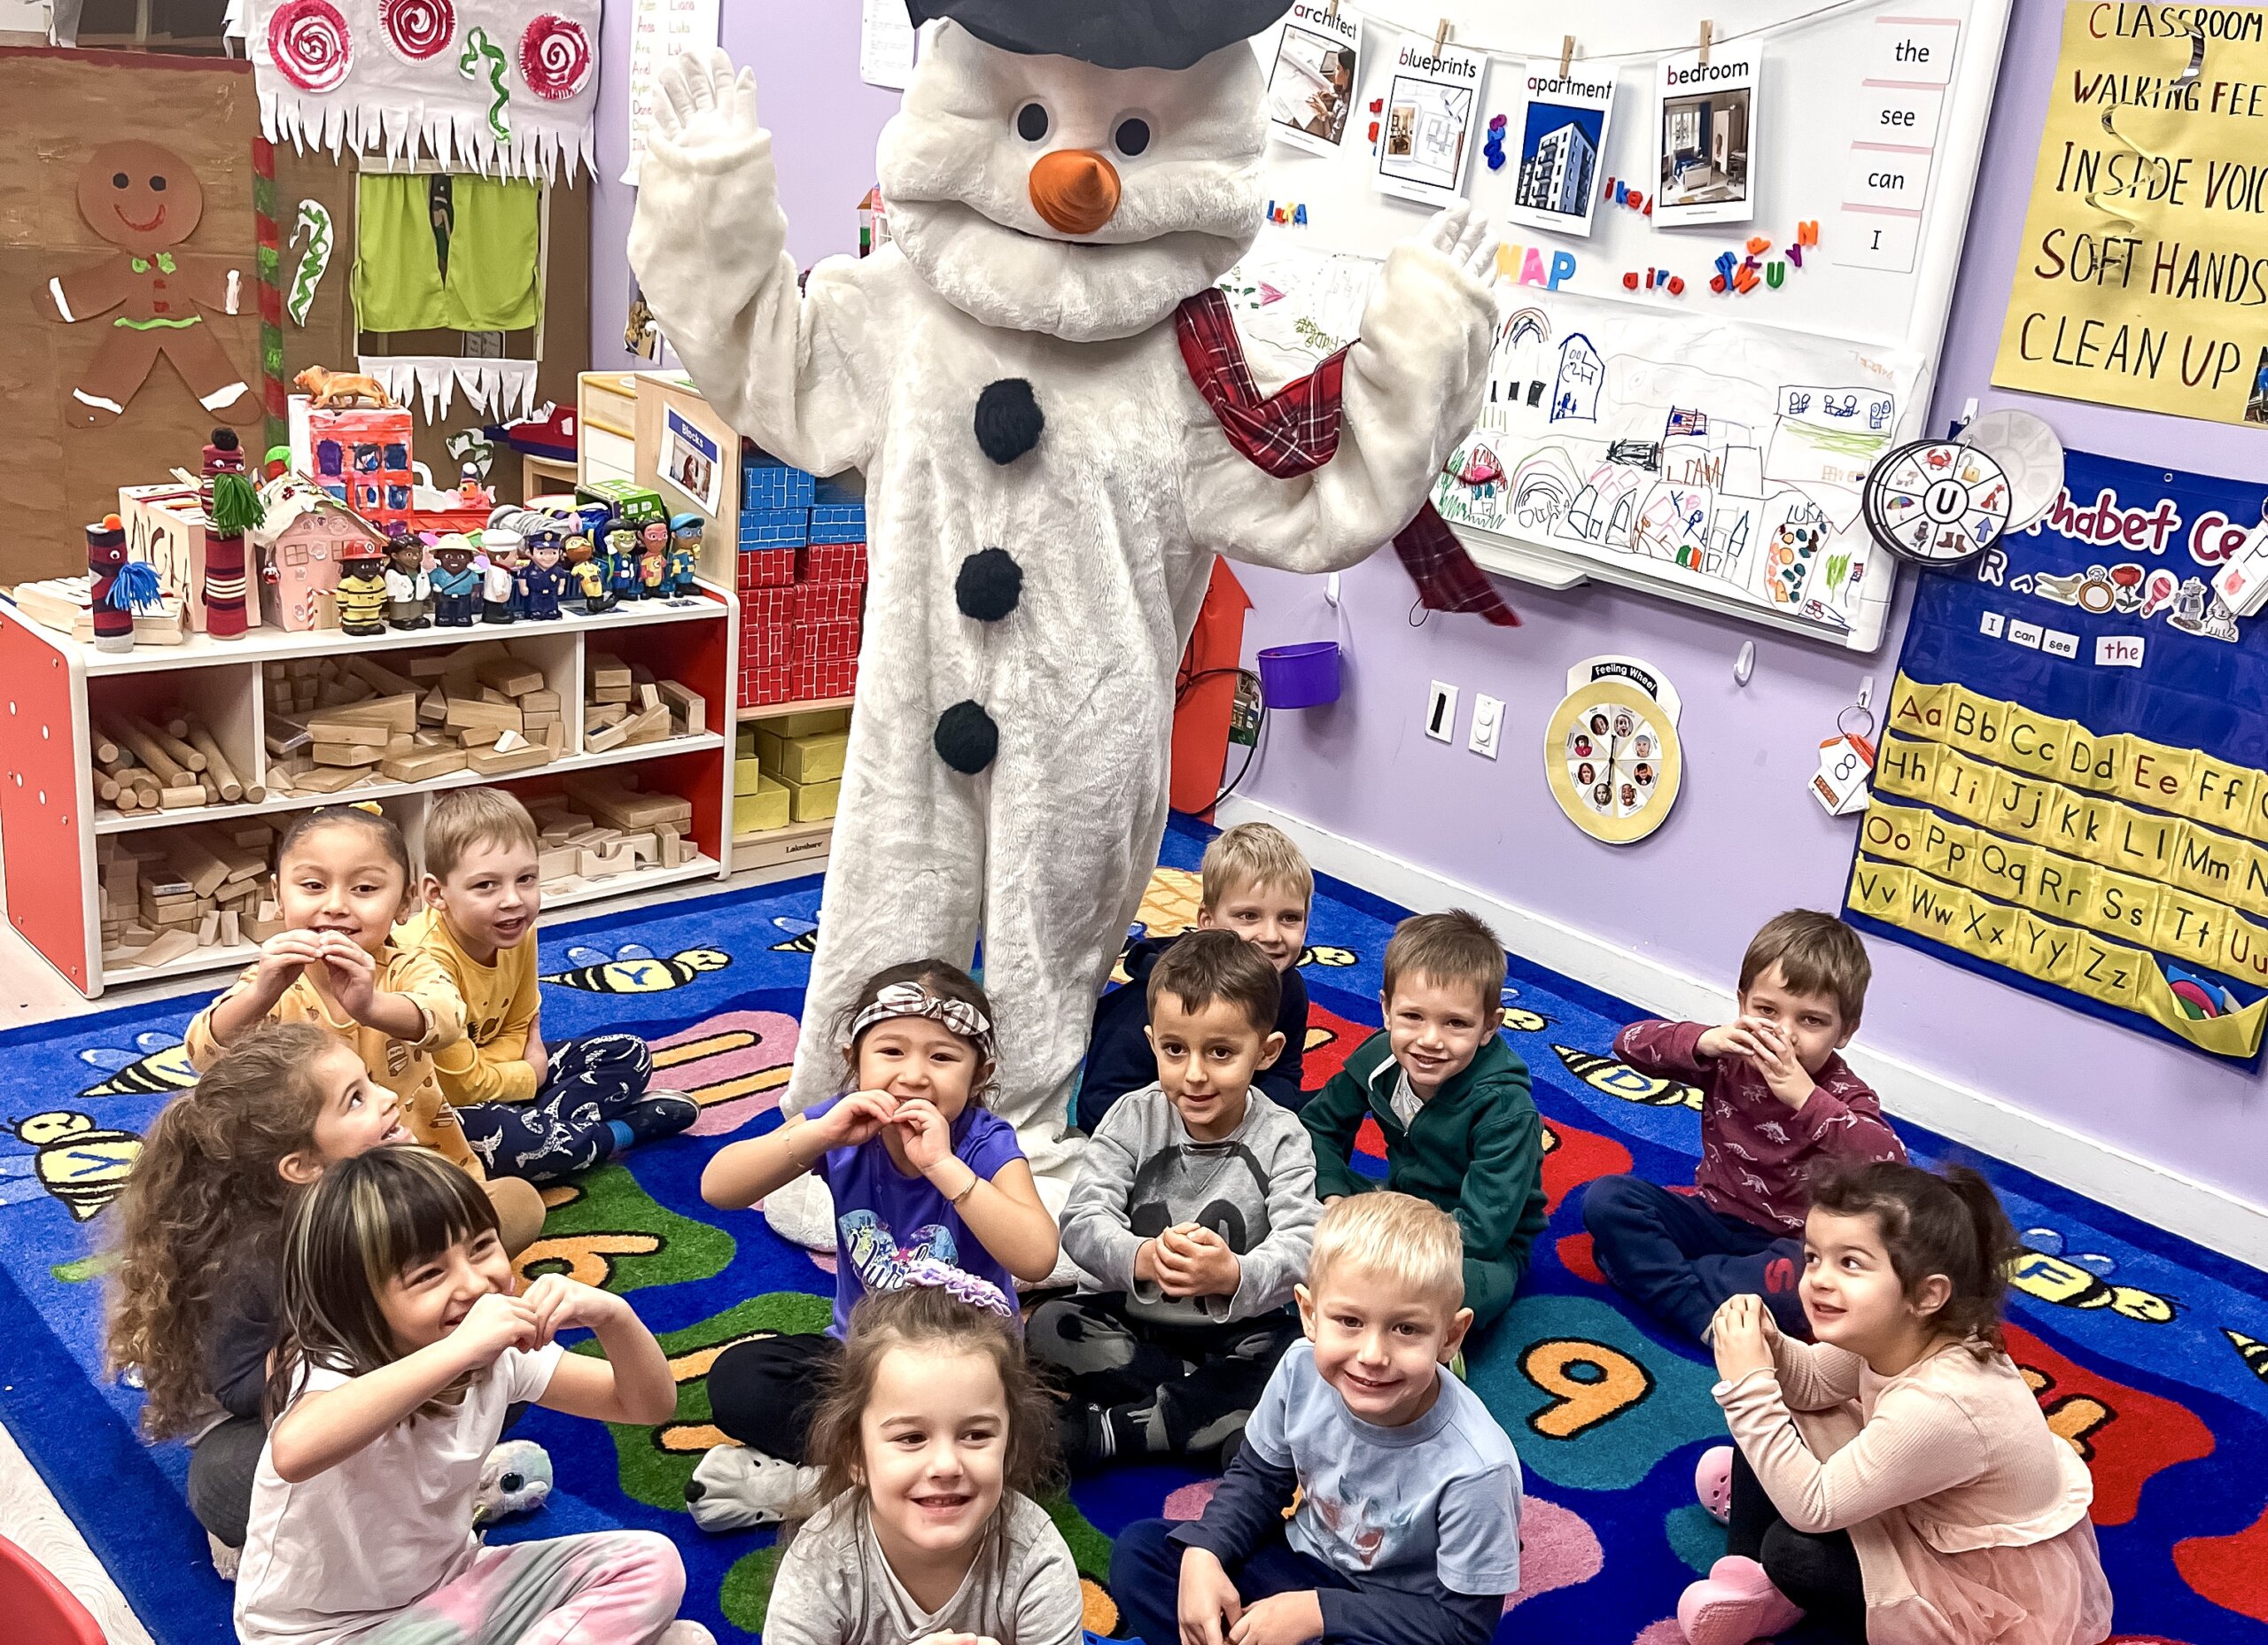 Group of children sitting on a colorful rug in a daycare classroom, posing with a person dressed in a snowman costume